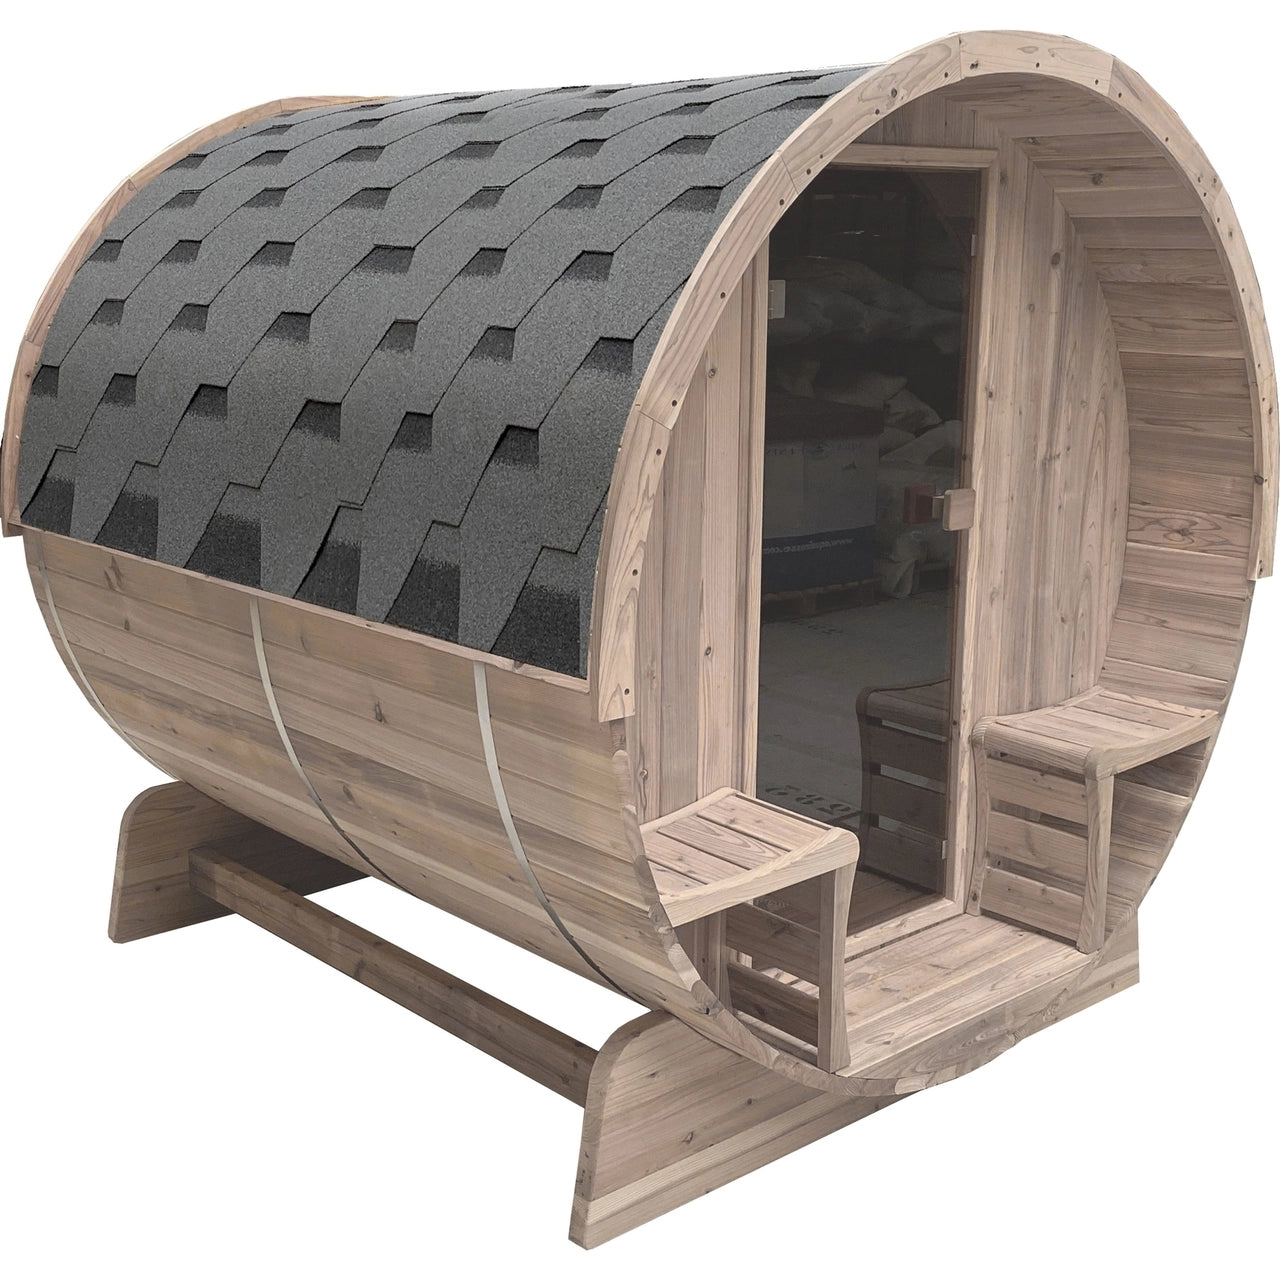 Outdoor Pine Barrel Sauna with Panoramic View and Bitumen Shingle Roofing - 4 Person - 4.5 kW Harvia KIP Heater